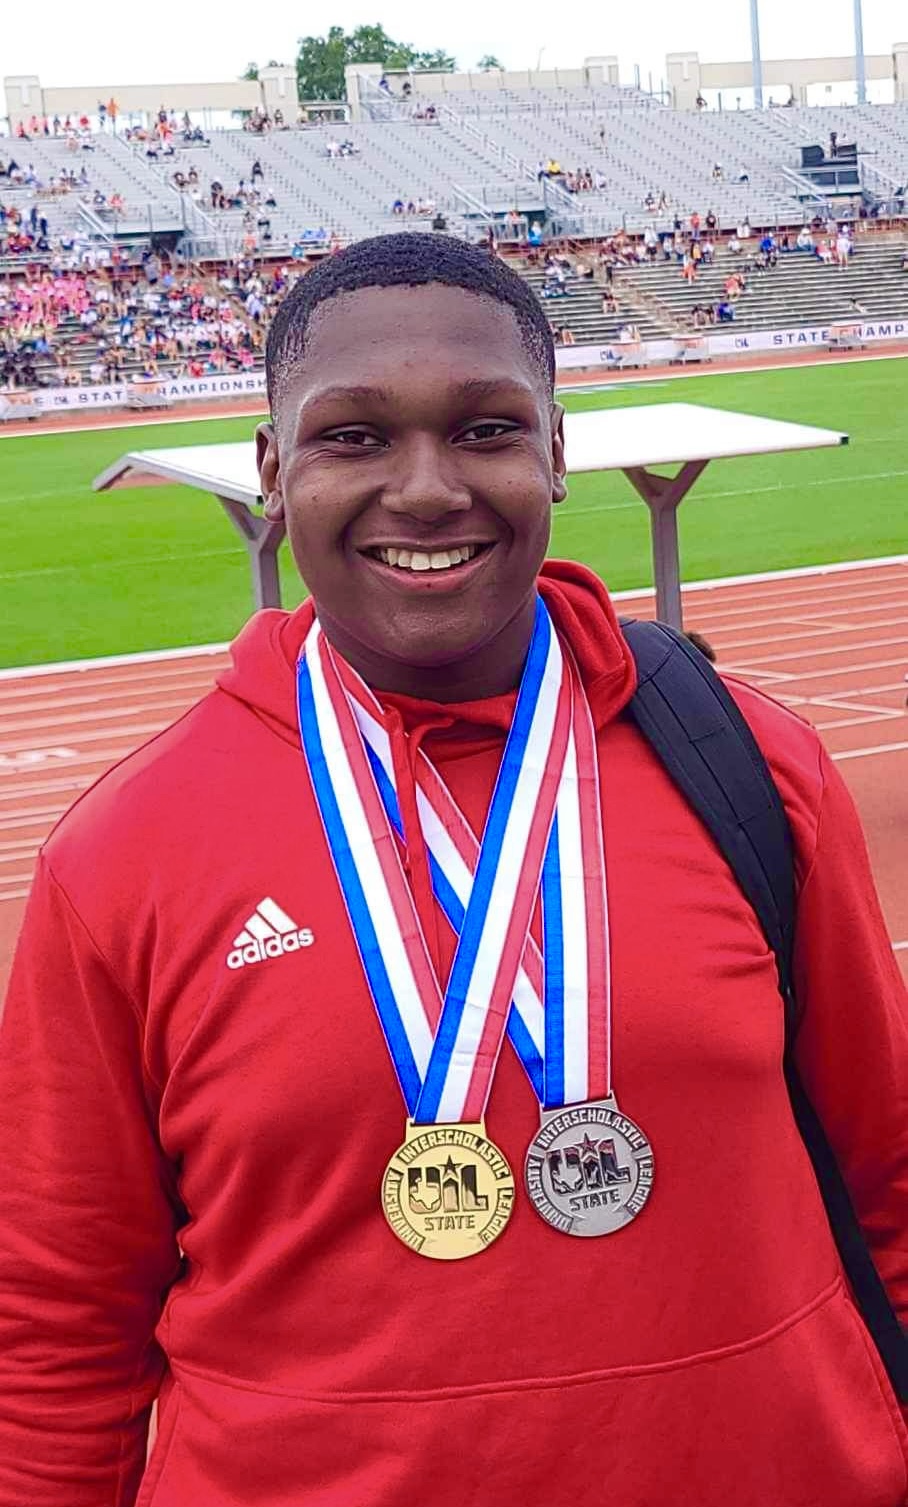 Braydon Nelson of Kilgore High School took silver in the Class 4A boys shot put Thursday morning at the UIL State Track & Field Championships, at University of Texas in Austin, and then had the clutch throw of his life, on his last opportunity of the event, to win gold in the 4A boys discus Thursday afternoon. Nelson, a North Texas signee in football, is coached by T.J. Gillen-Hall, D.Q. Scott and Josh Lyons. The state track meet is held at UT's Mike A. Myers Stadium, and had several athletes there on Thursday from the ETBlitz.com area. Read about them all below! (Photo courtesy of T.J. GILLEN-HALL)